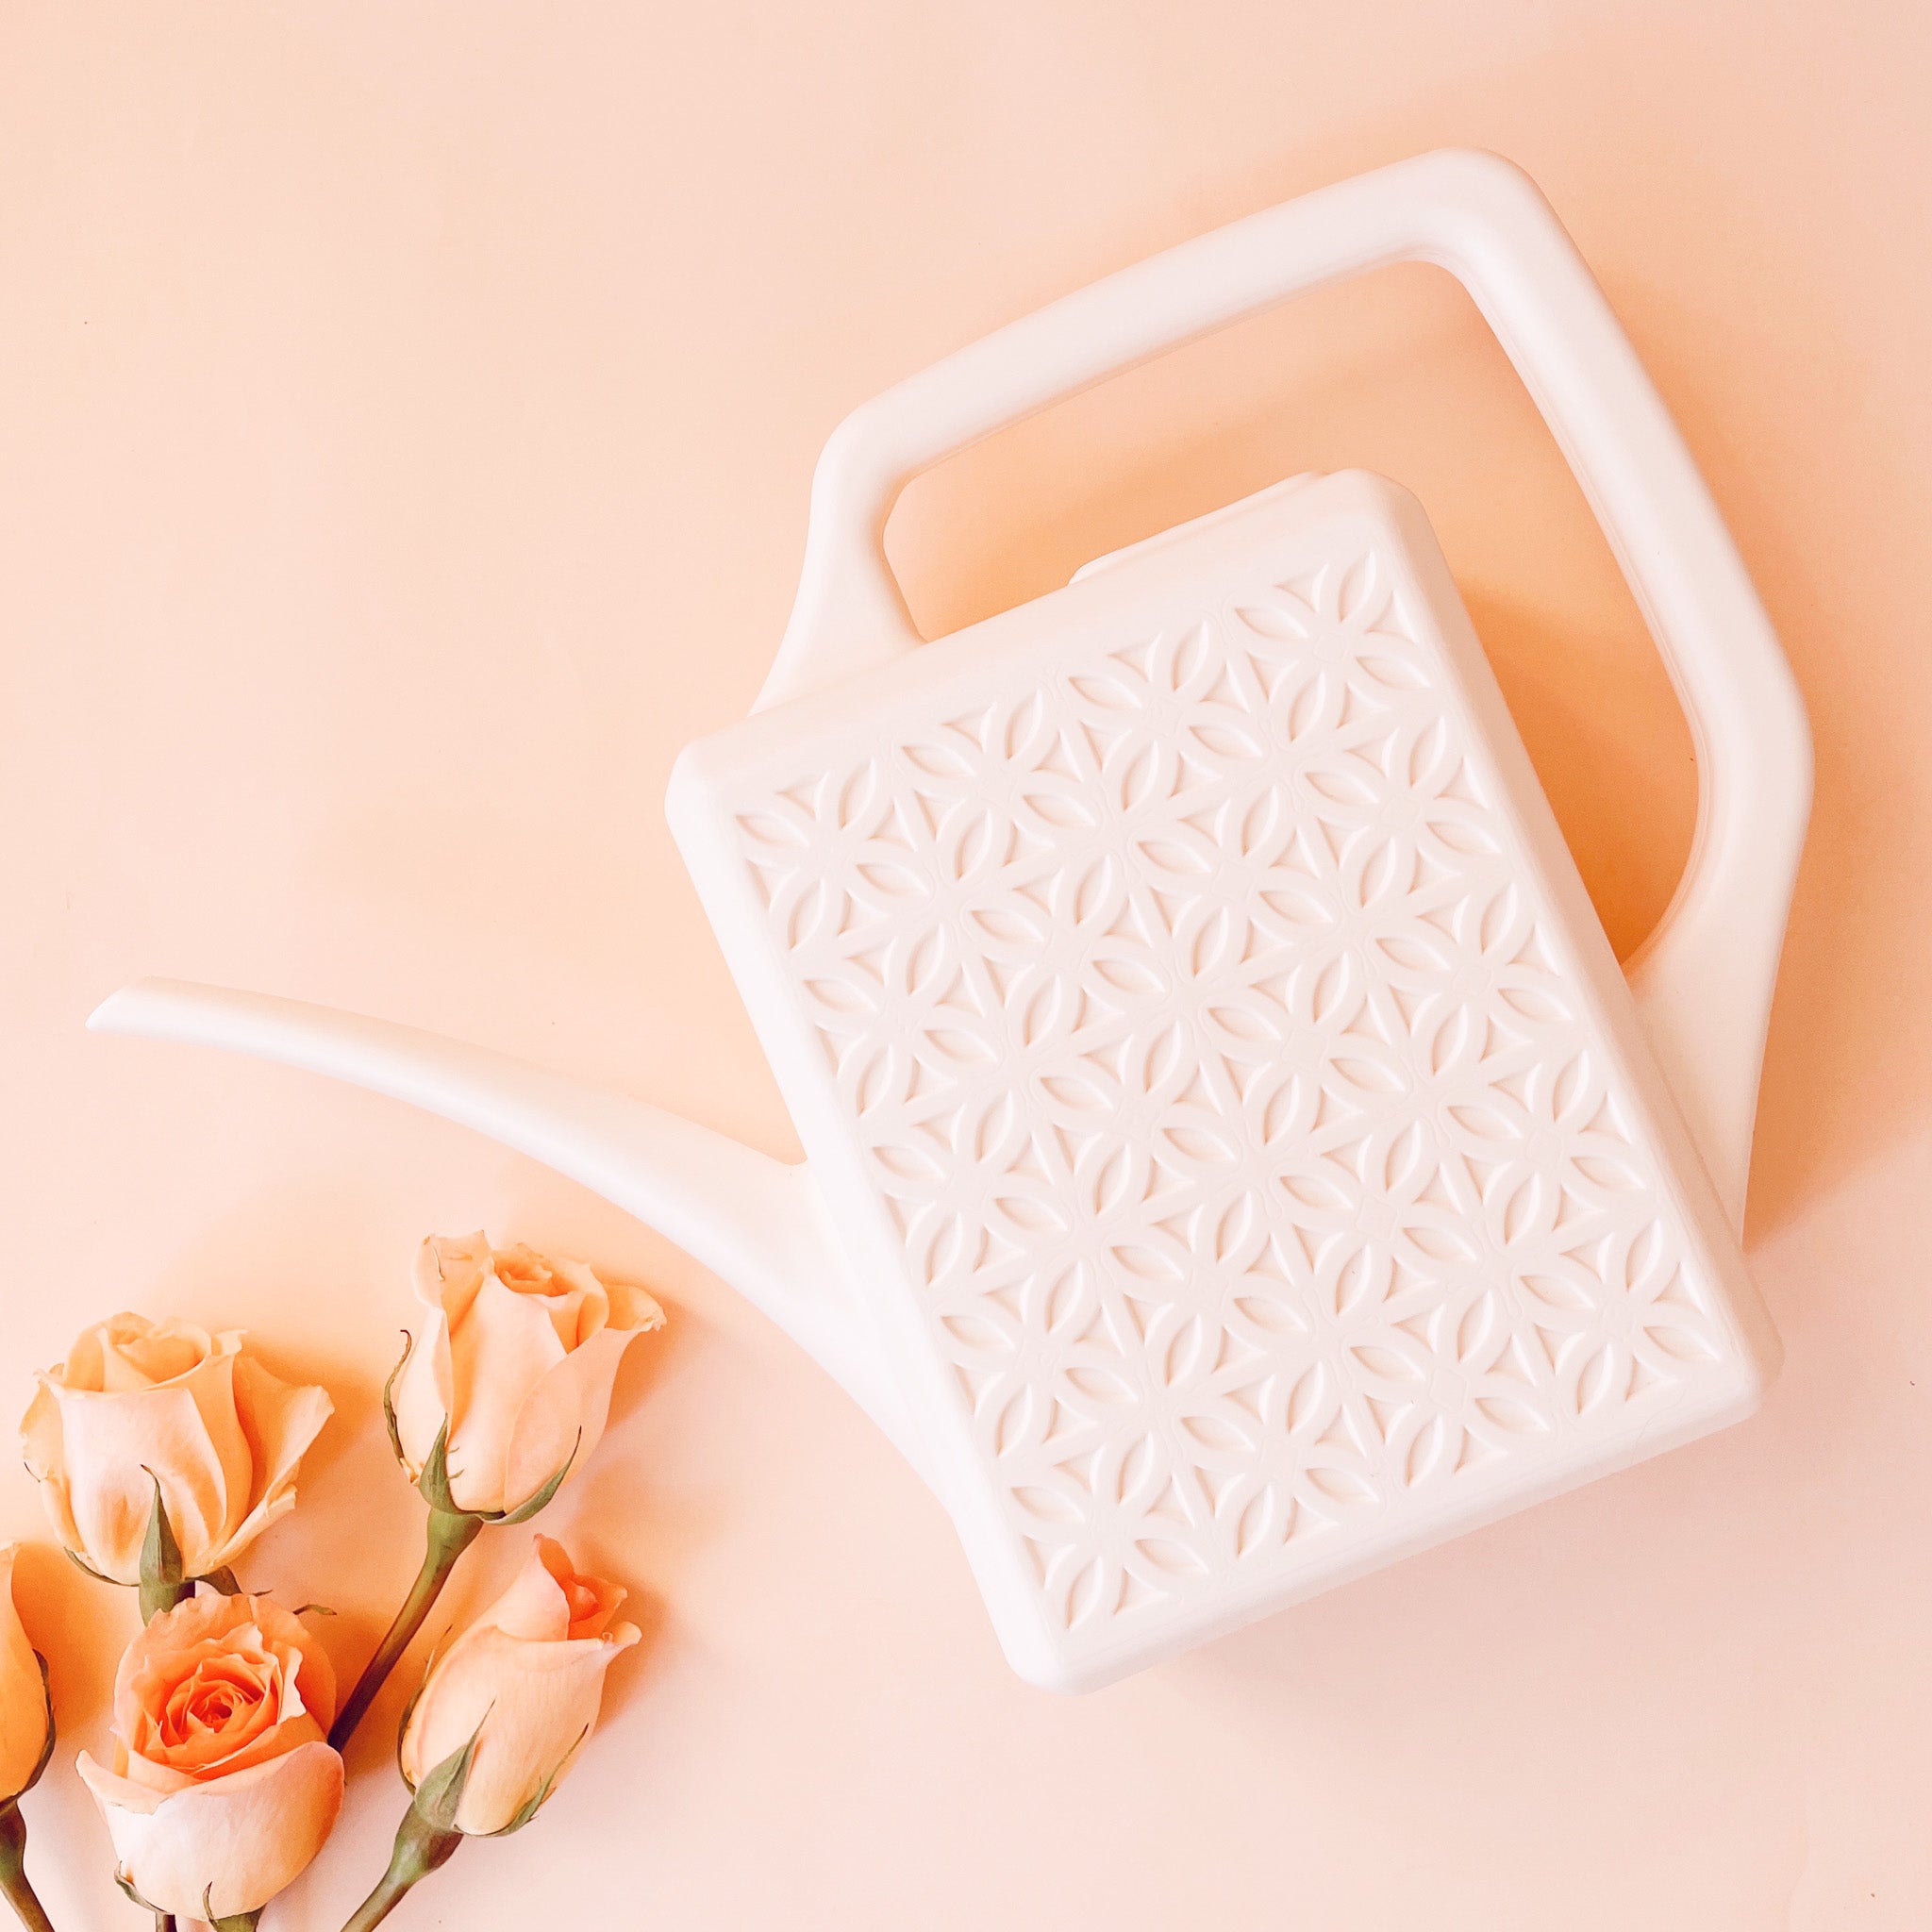 On a peachy background is a white plastic watering can with a long curved spout and a squared off handle along with a breeze block textured design on the sides of the watering can photographed next to peachy colored roses. 